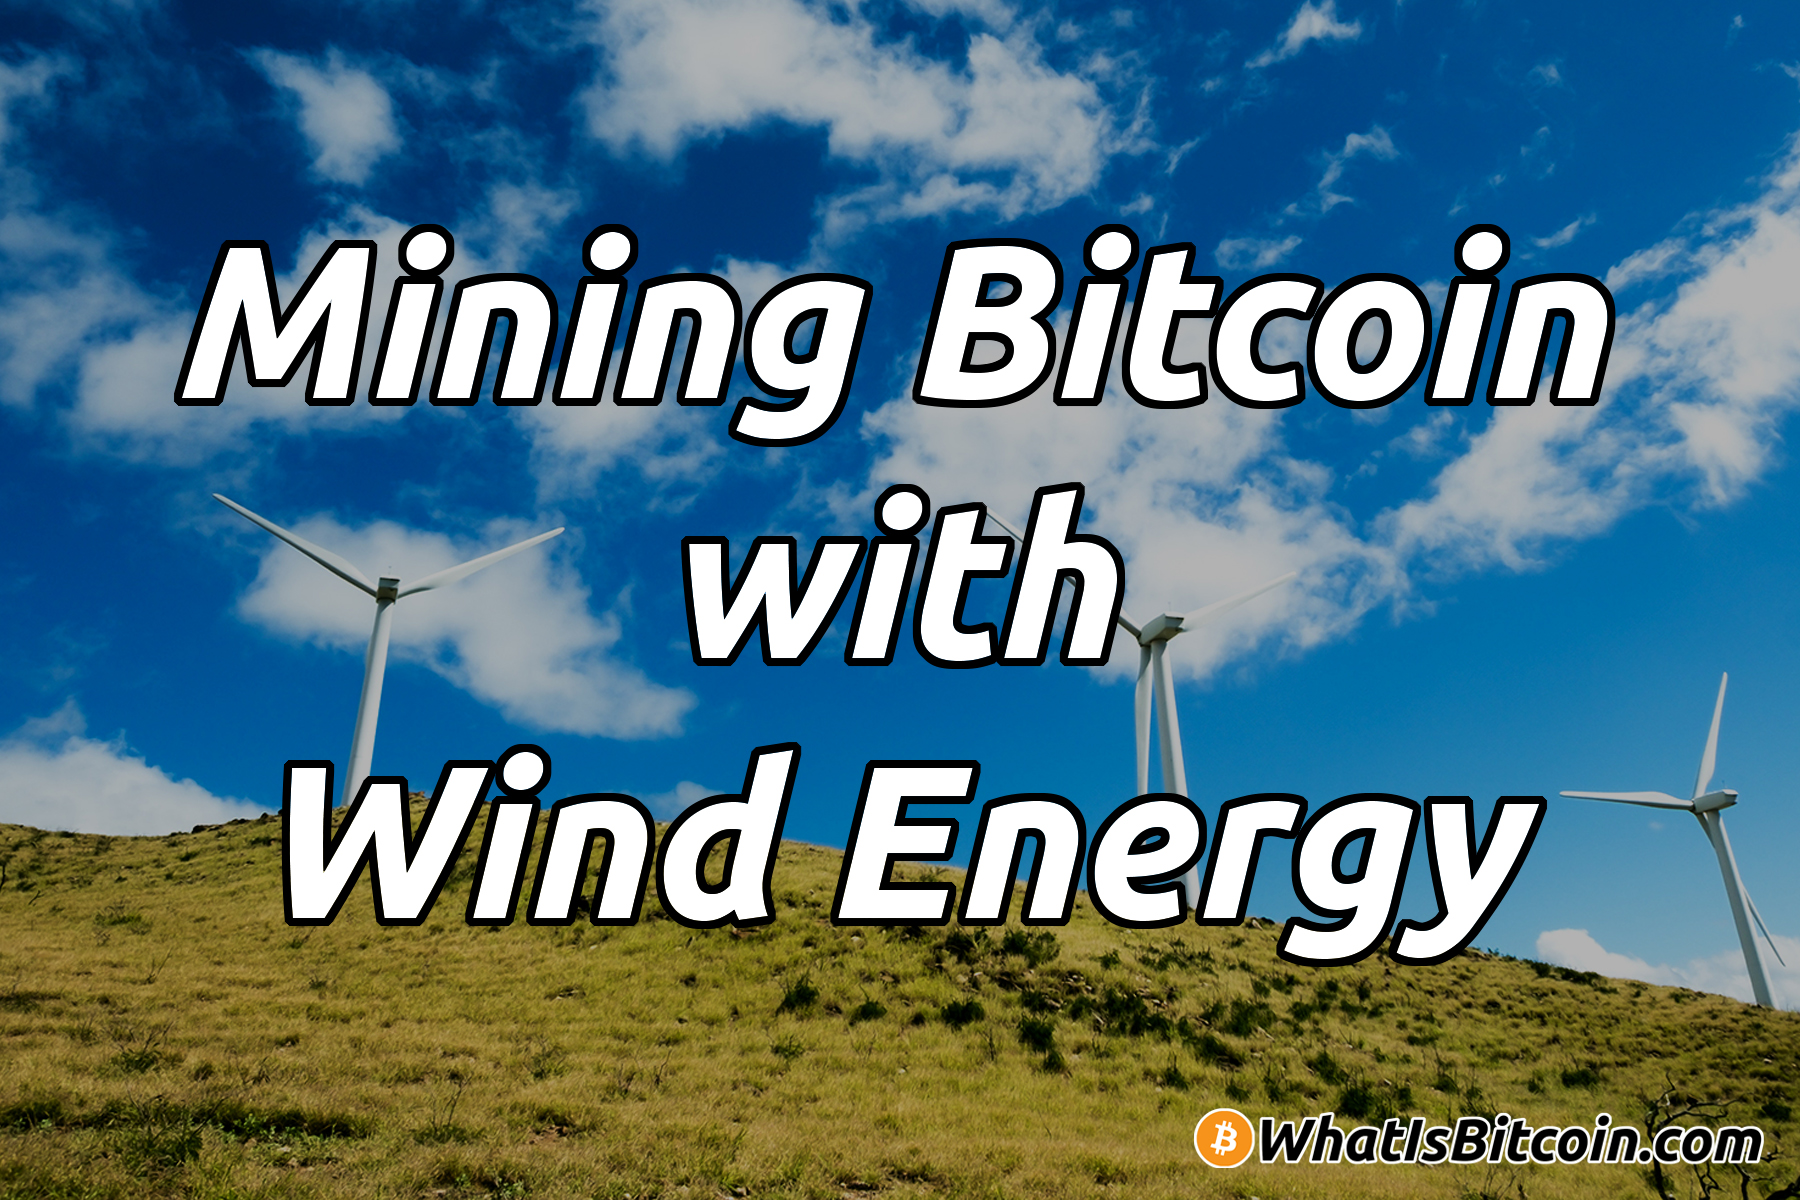 Mining Bitcoin with Wind Energy - What Is Bitcoin?